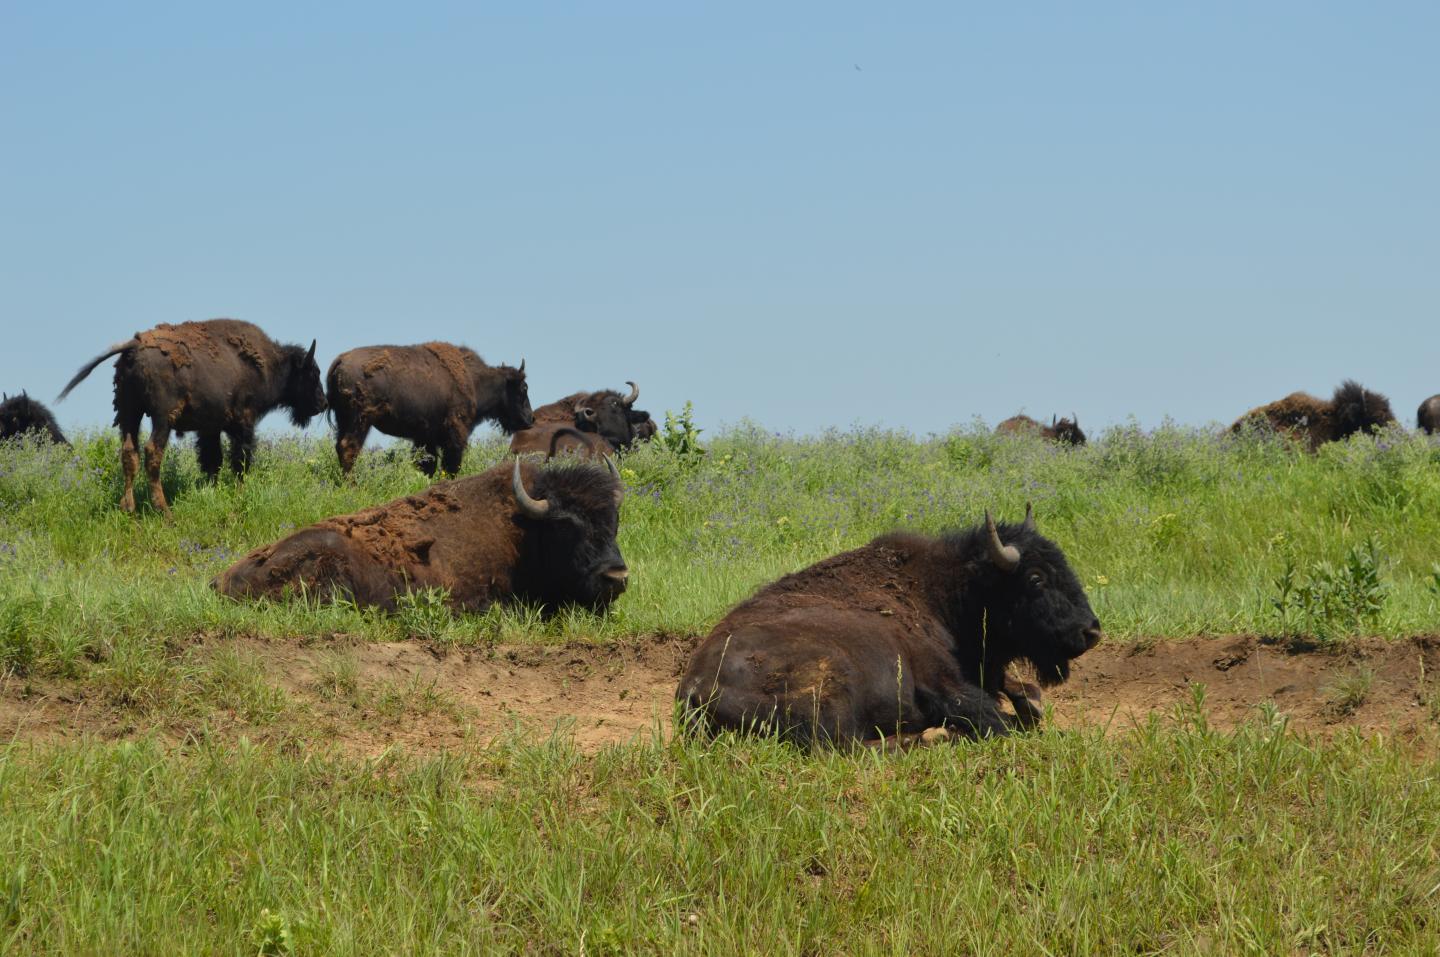 Plant species proclaimed wiped out, Bison recuperation offset by 31 creature